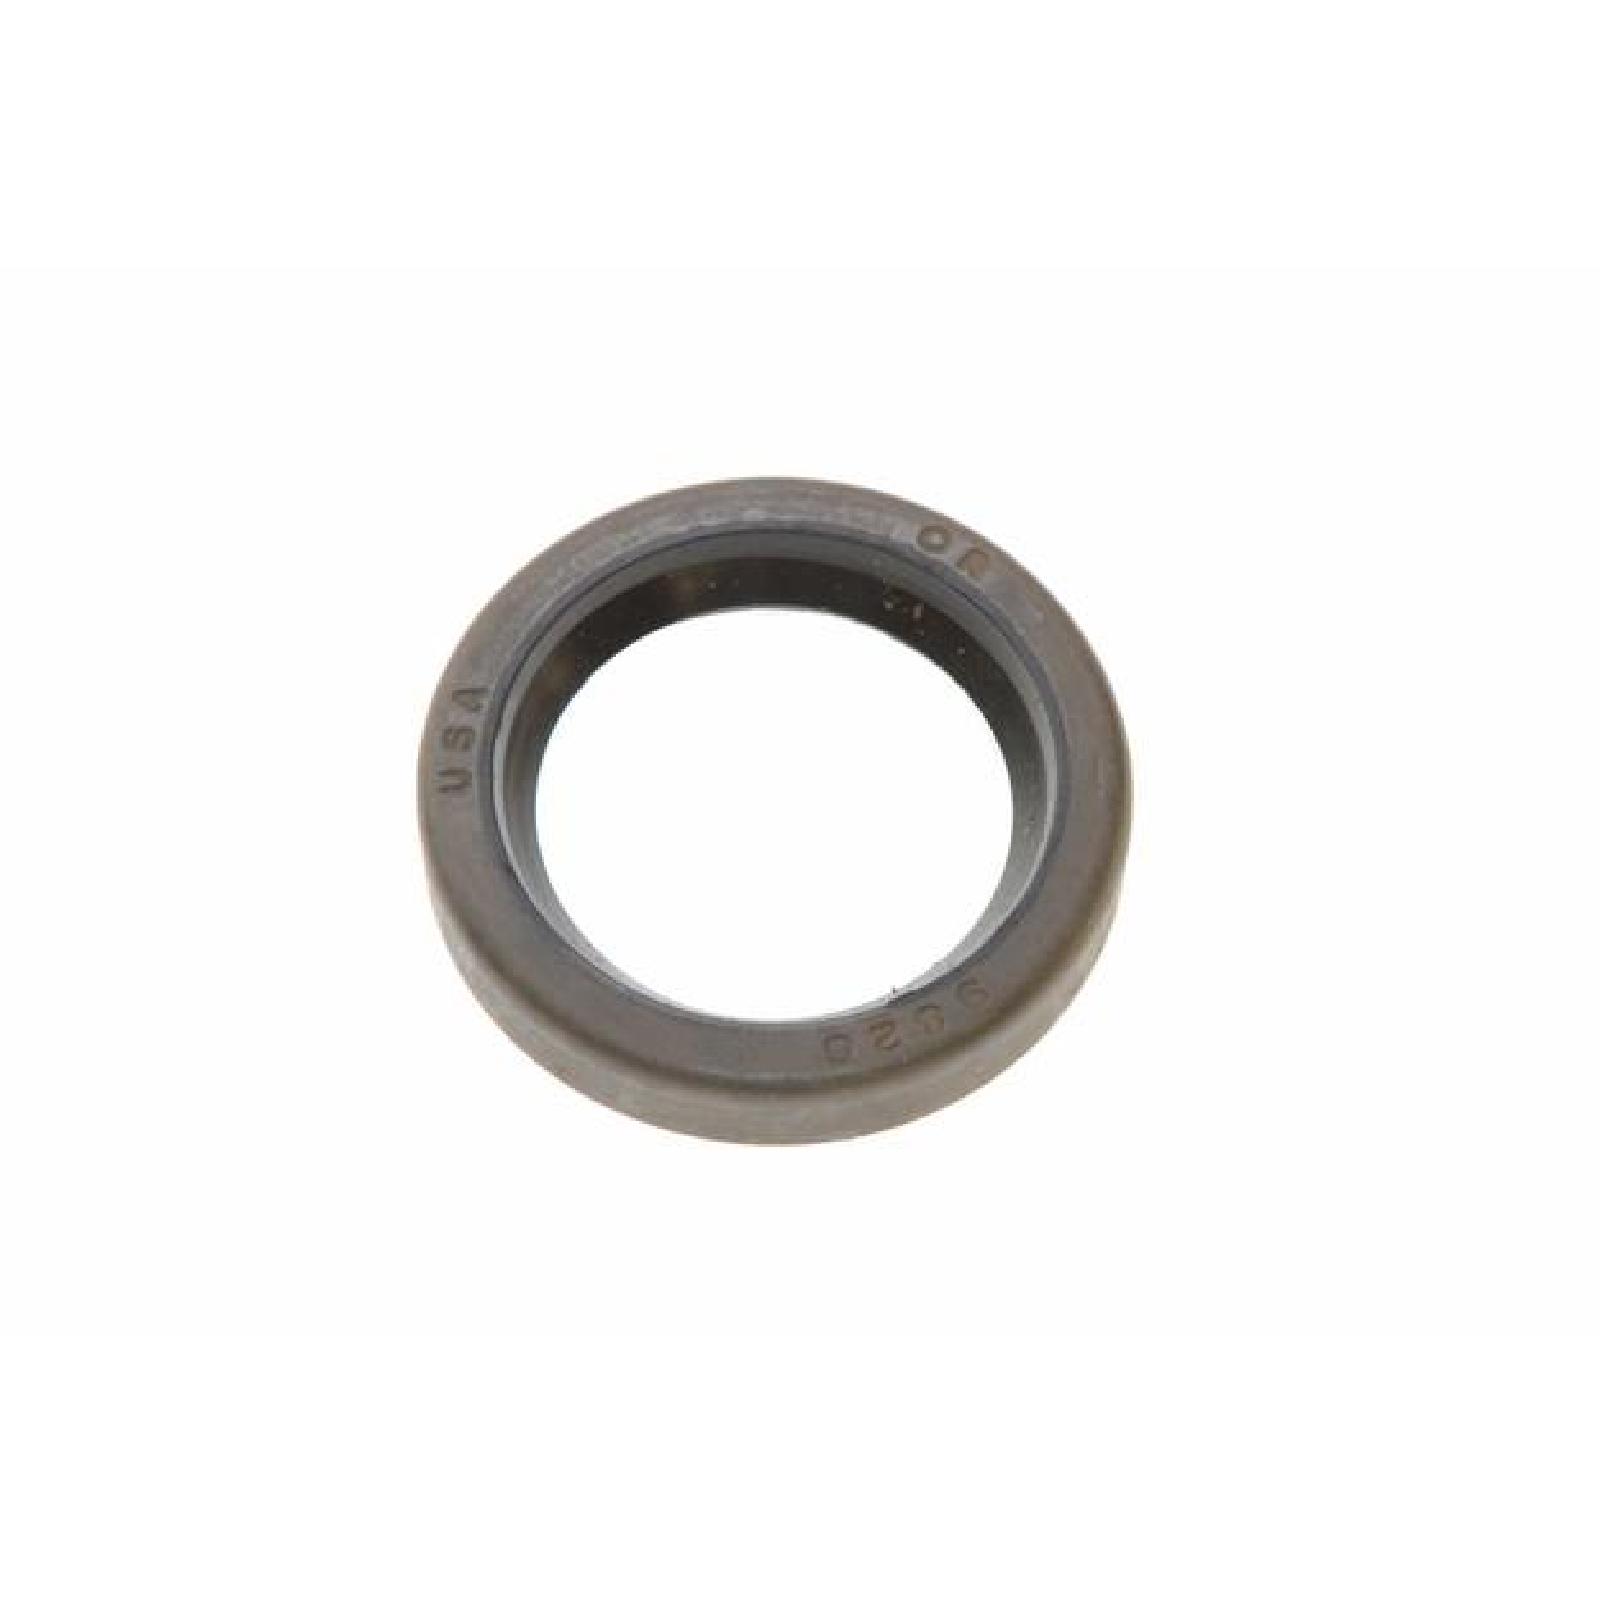 OIL SEAL part# 28427 by Tecumseh - Click Image to Close